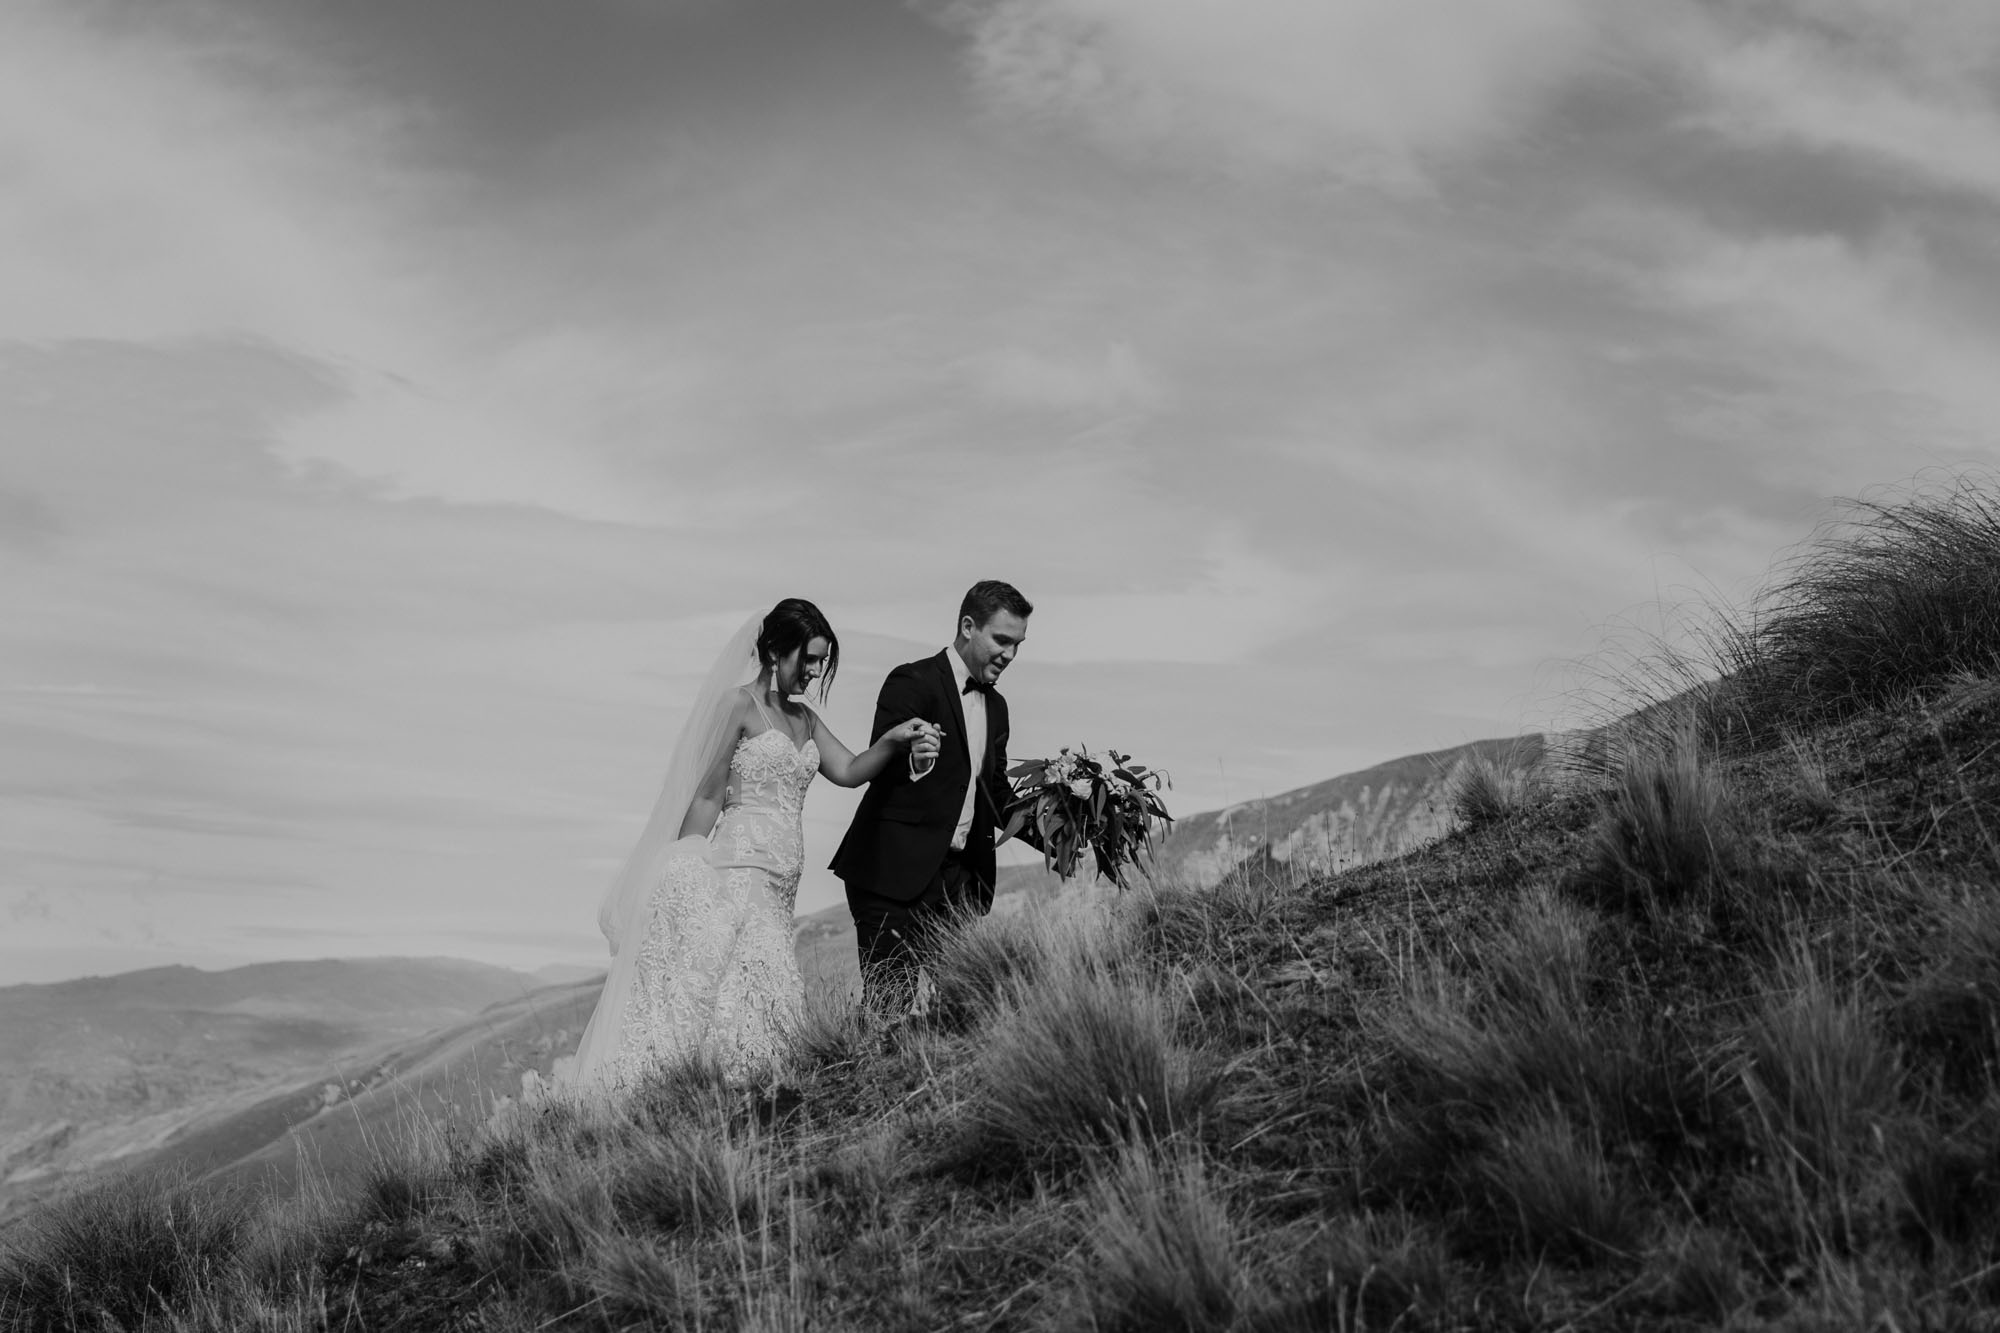 Beautiful Wedding Images On Top Of The Mountain